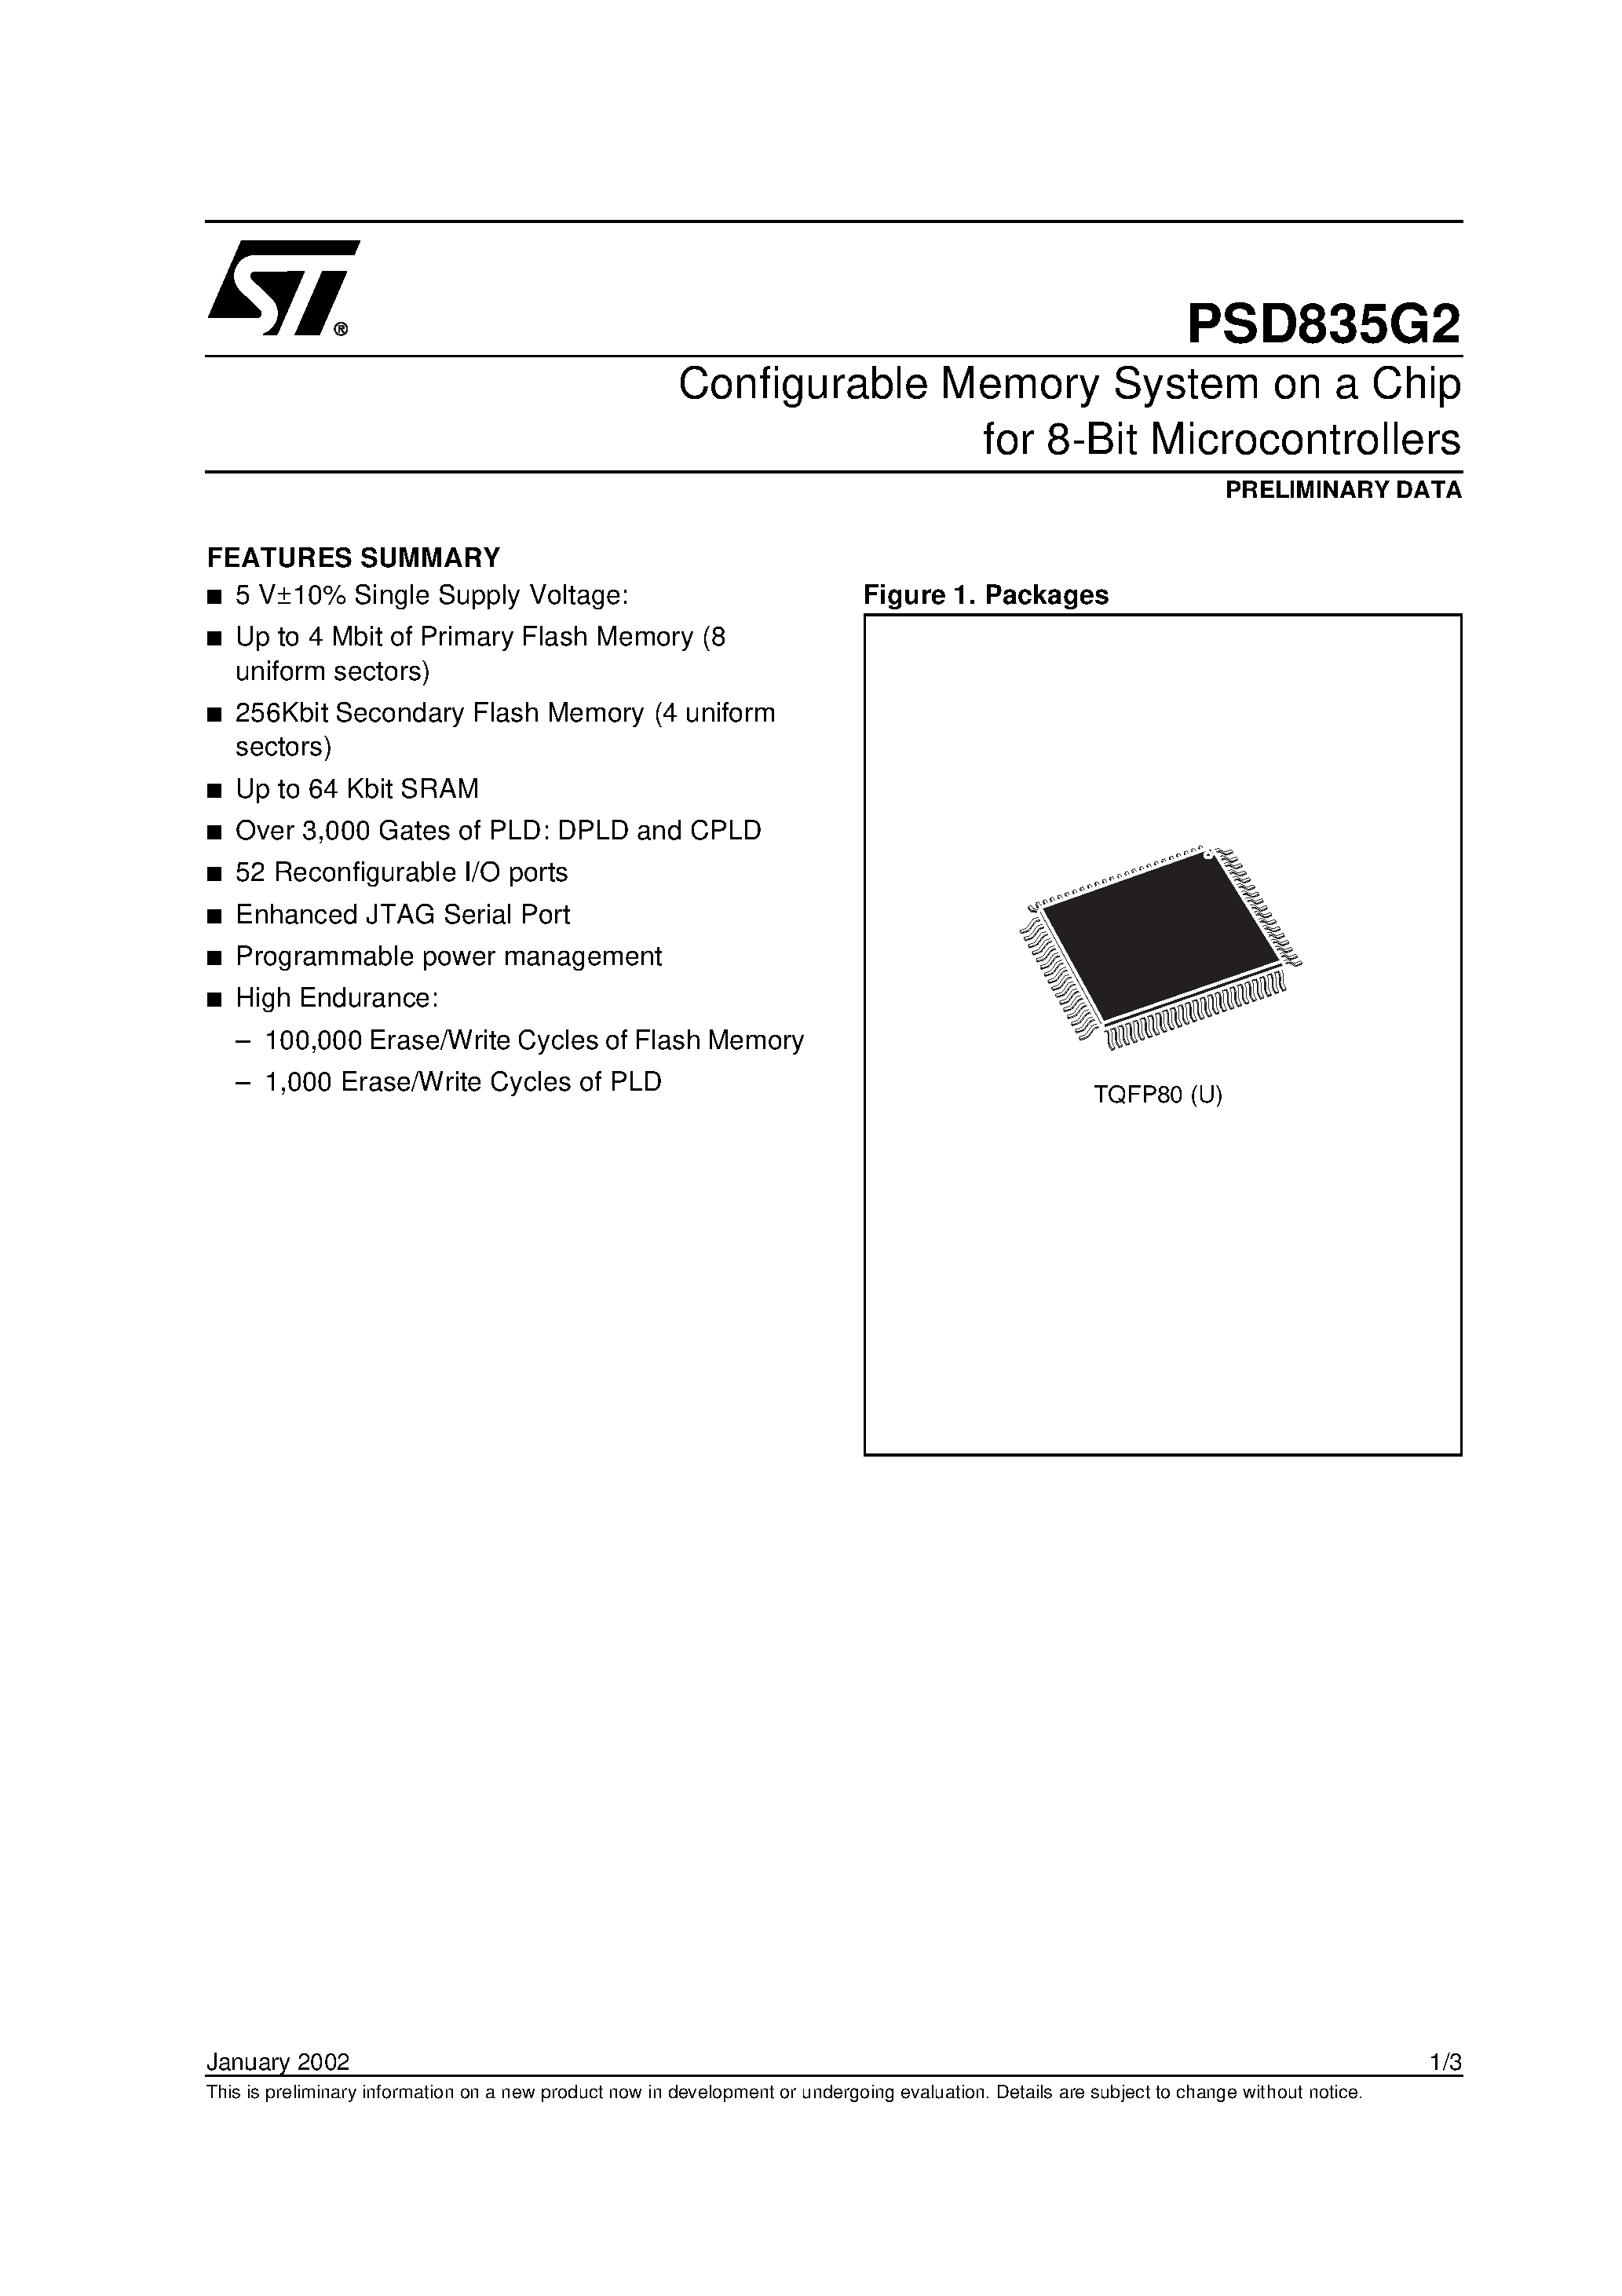 Datasheet PSD835F2-A-70MI - Configurable Memory System on a Chip for 8-Bit Microcontrollers page 1